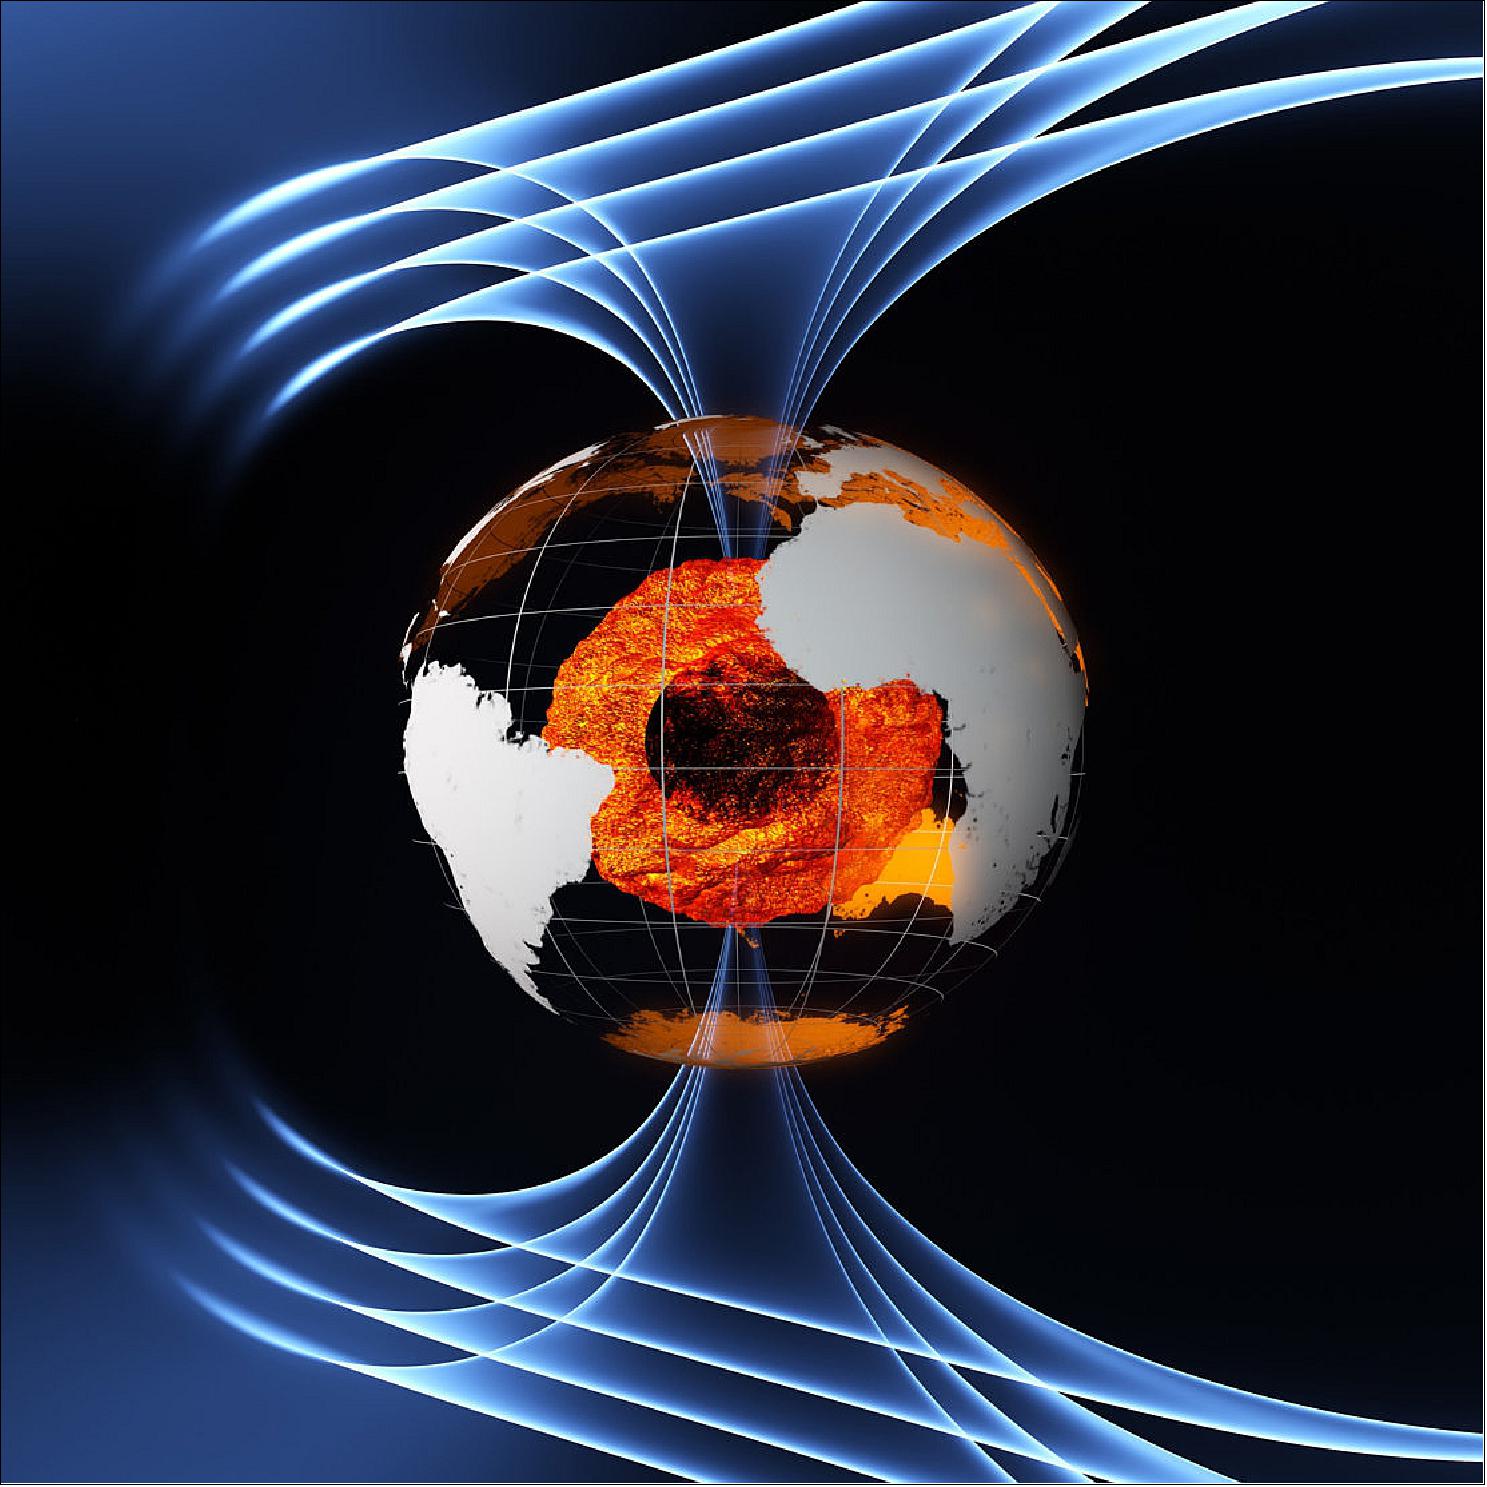 Figure 103: Earth’s magnetic field is thought to be generated largely by an ocean of superheated, swirling liquid iron that makes up Earth’s outer core 3000 km under our feet. Acting like the spinning conductor in a bicycle dynamo, it generates electric currents and thus the continuously changing electromagnetic field (image credit: ESA/AOES Medialab)